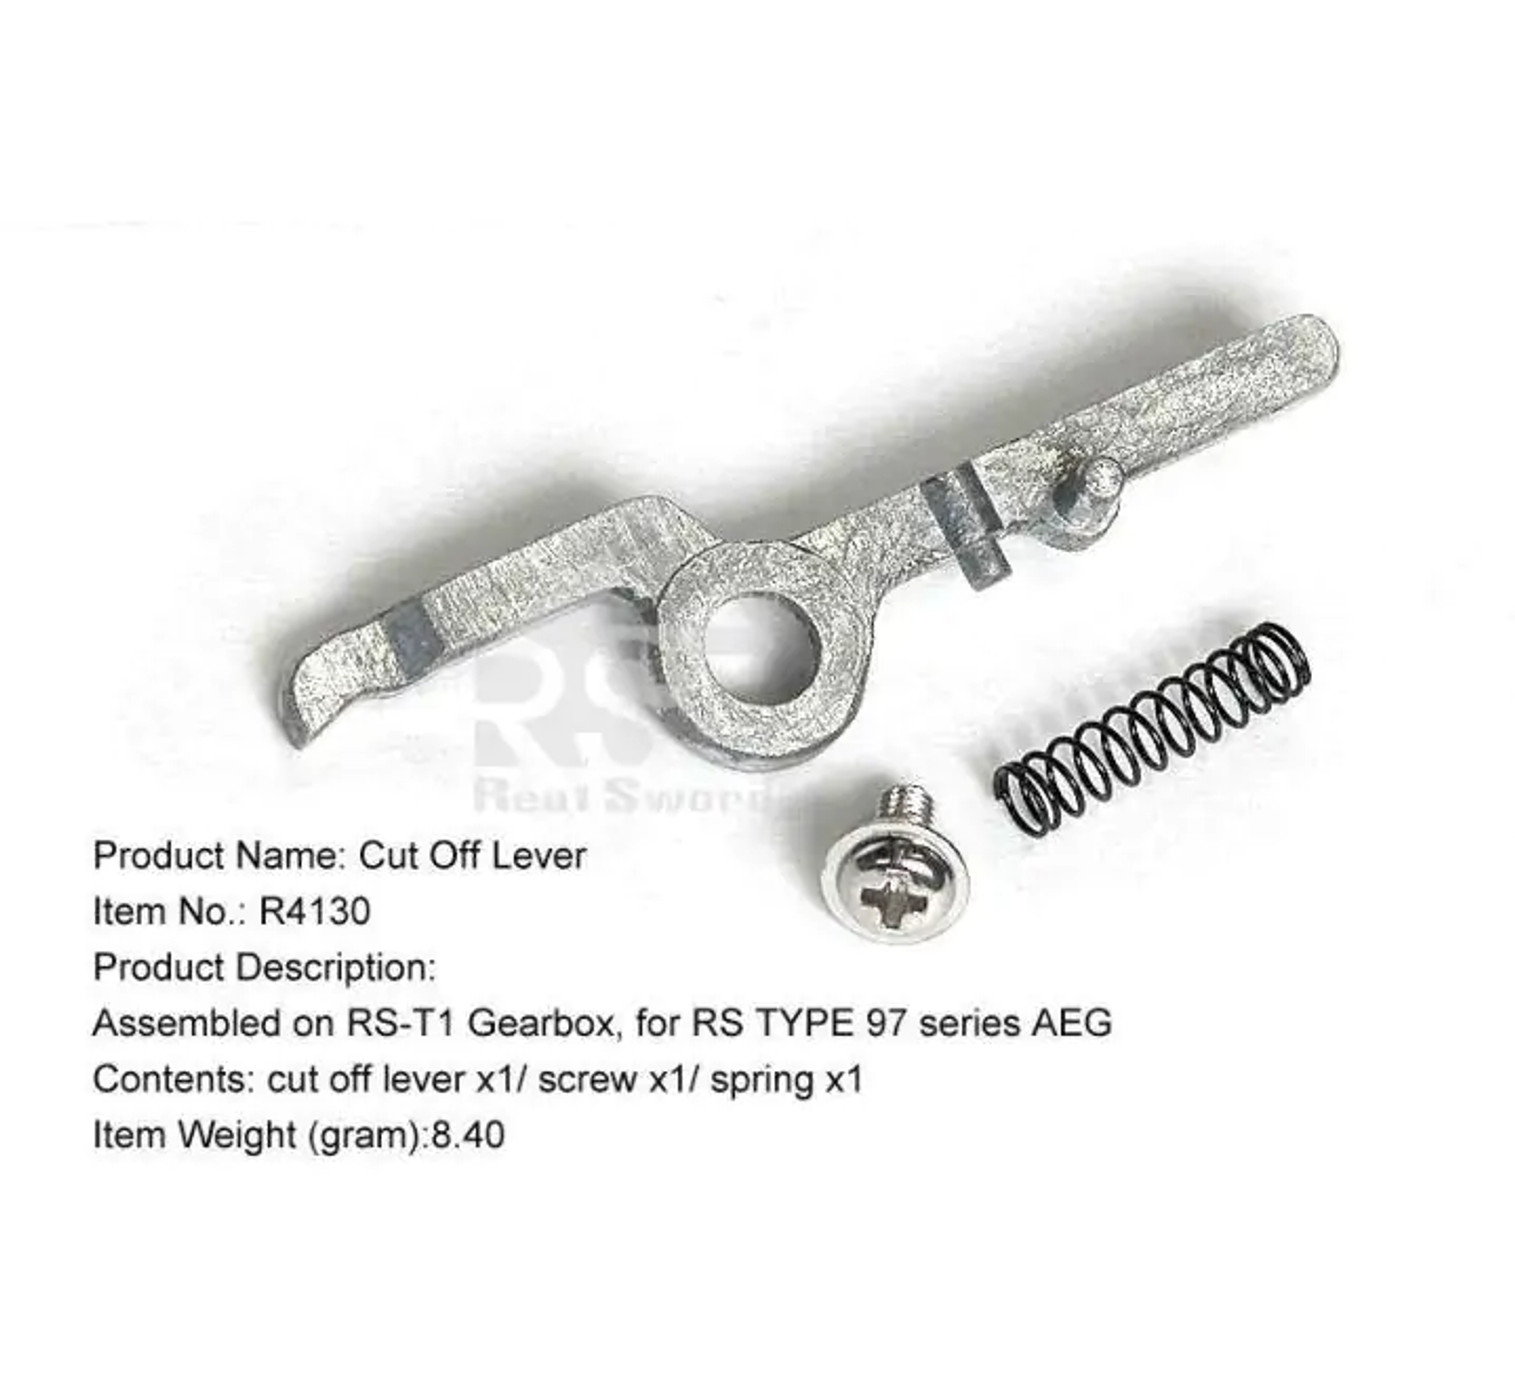 Real Sword Cut Off Lever For Type 97 Series T1 Gearboxes